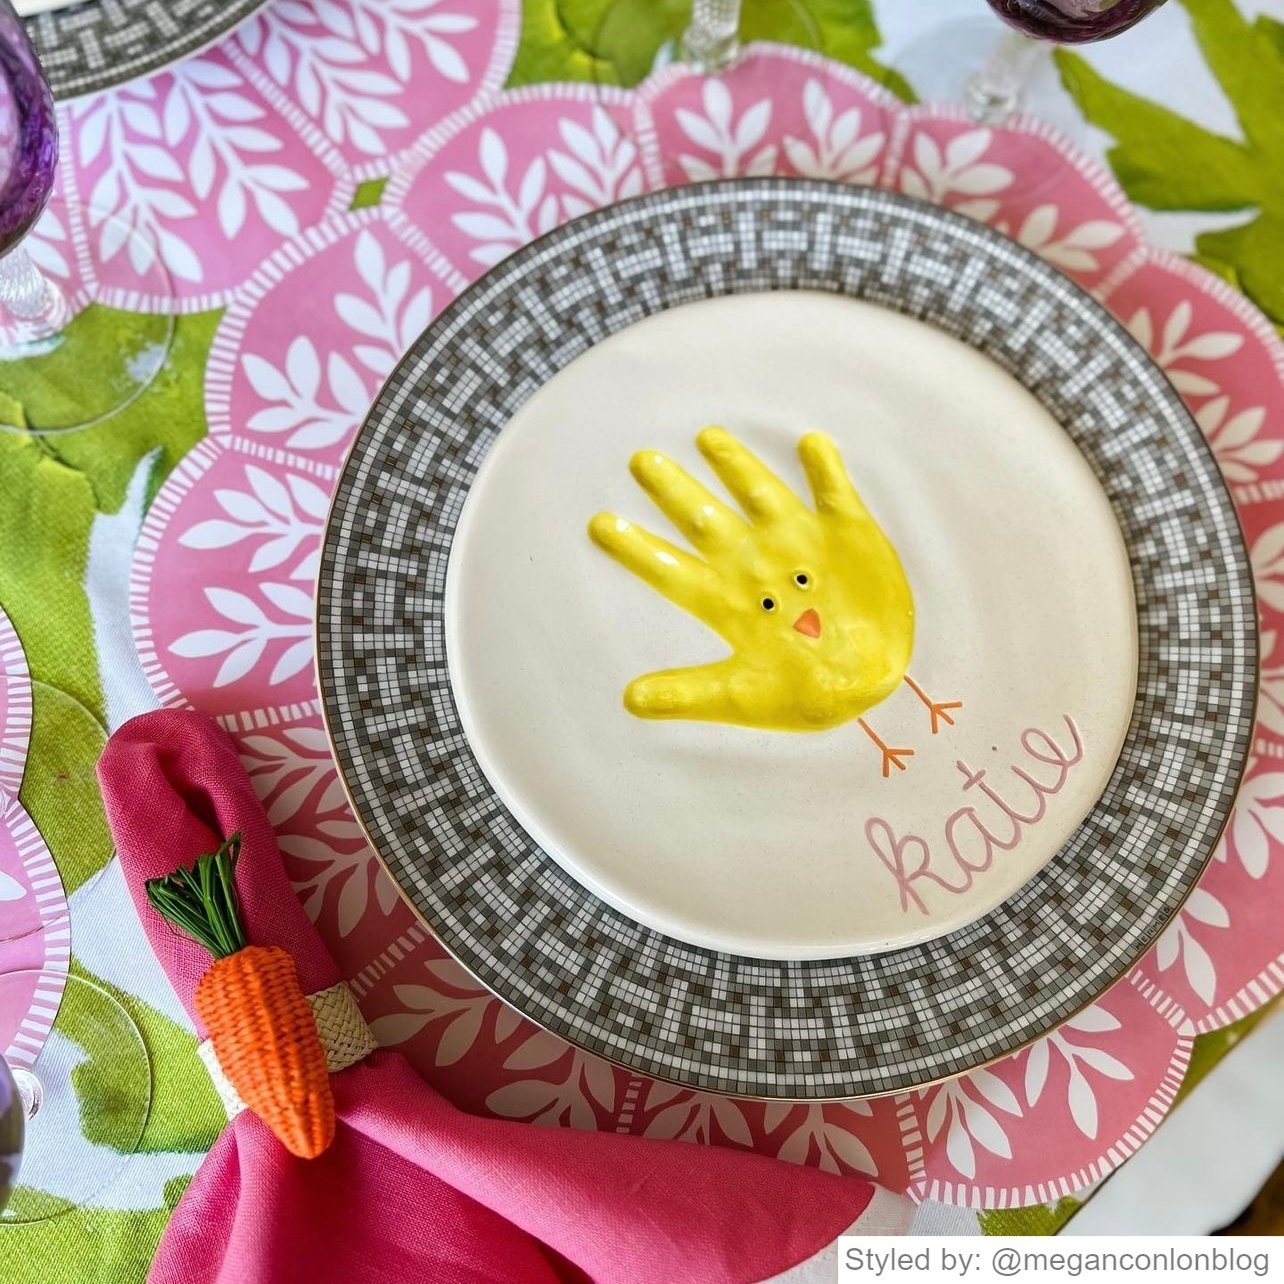 Pink and white scalloped round paper placemat layered with plates and a hot pink napkin with a carrot napkin ring